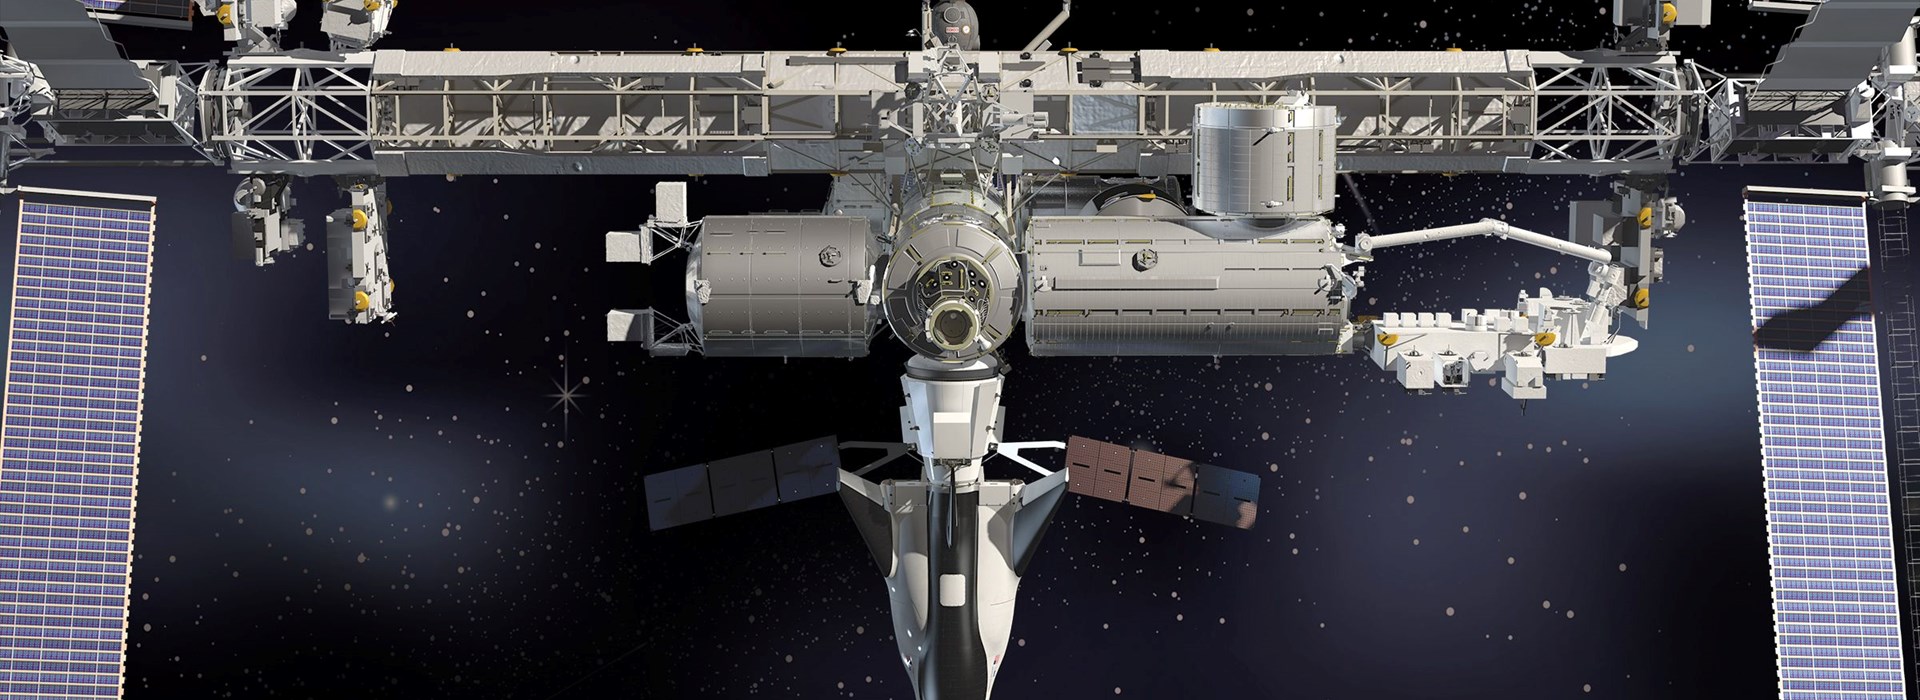 Sierra Space Dream chaser space station.